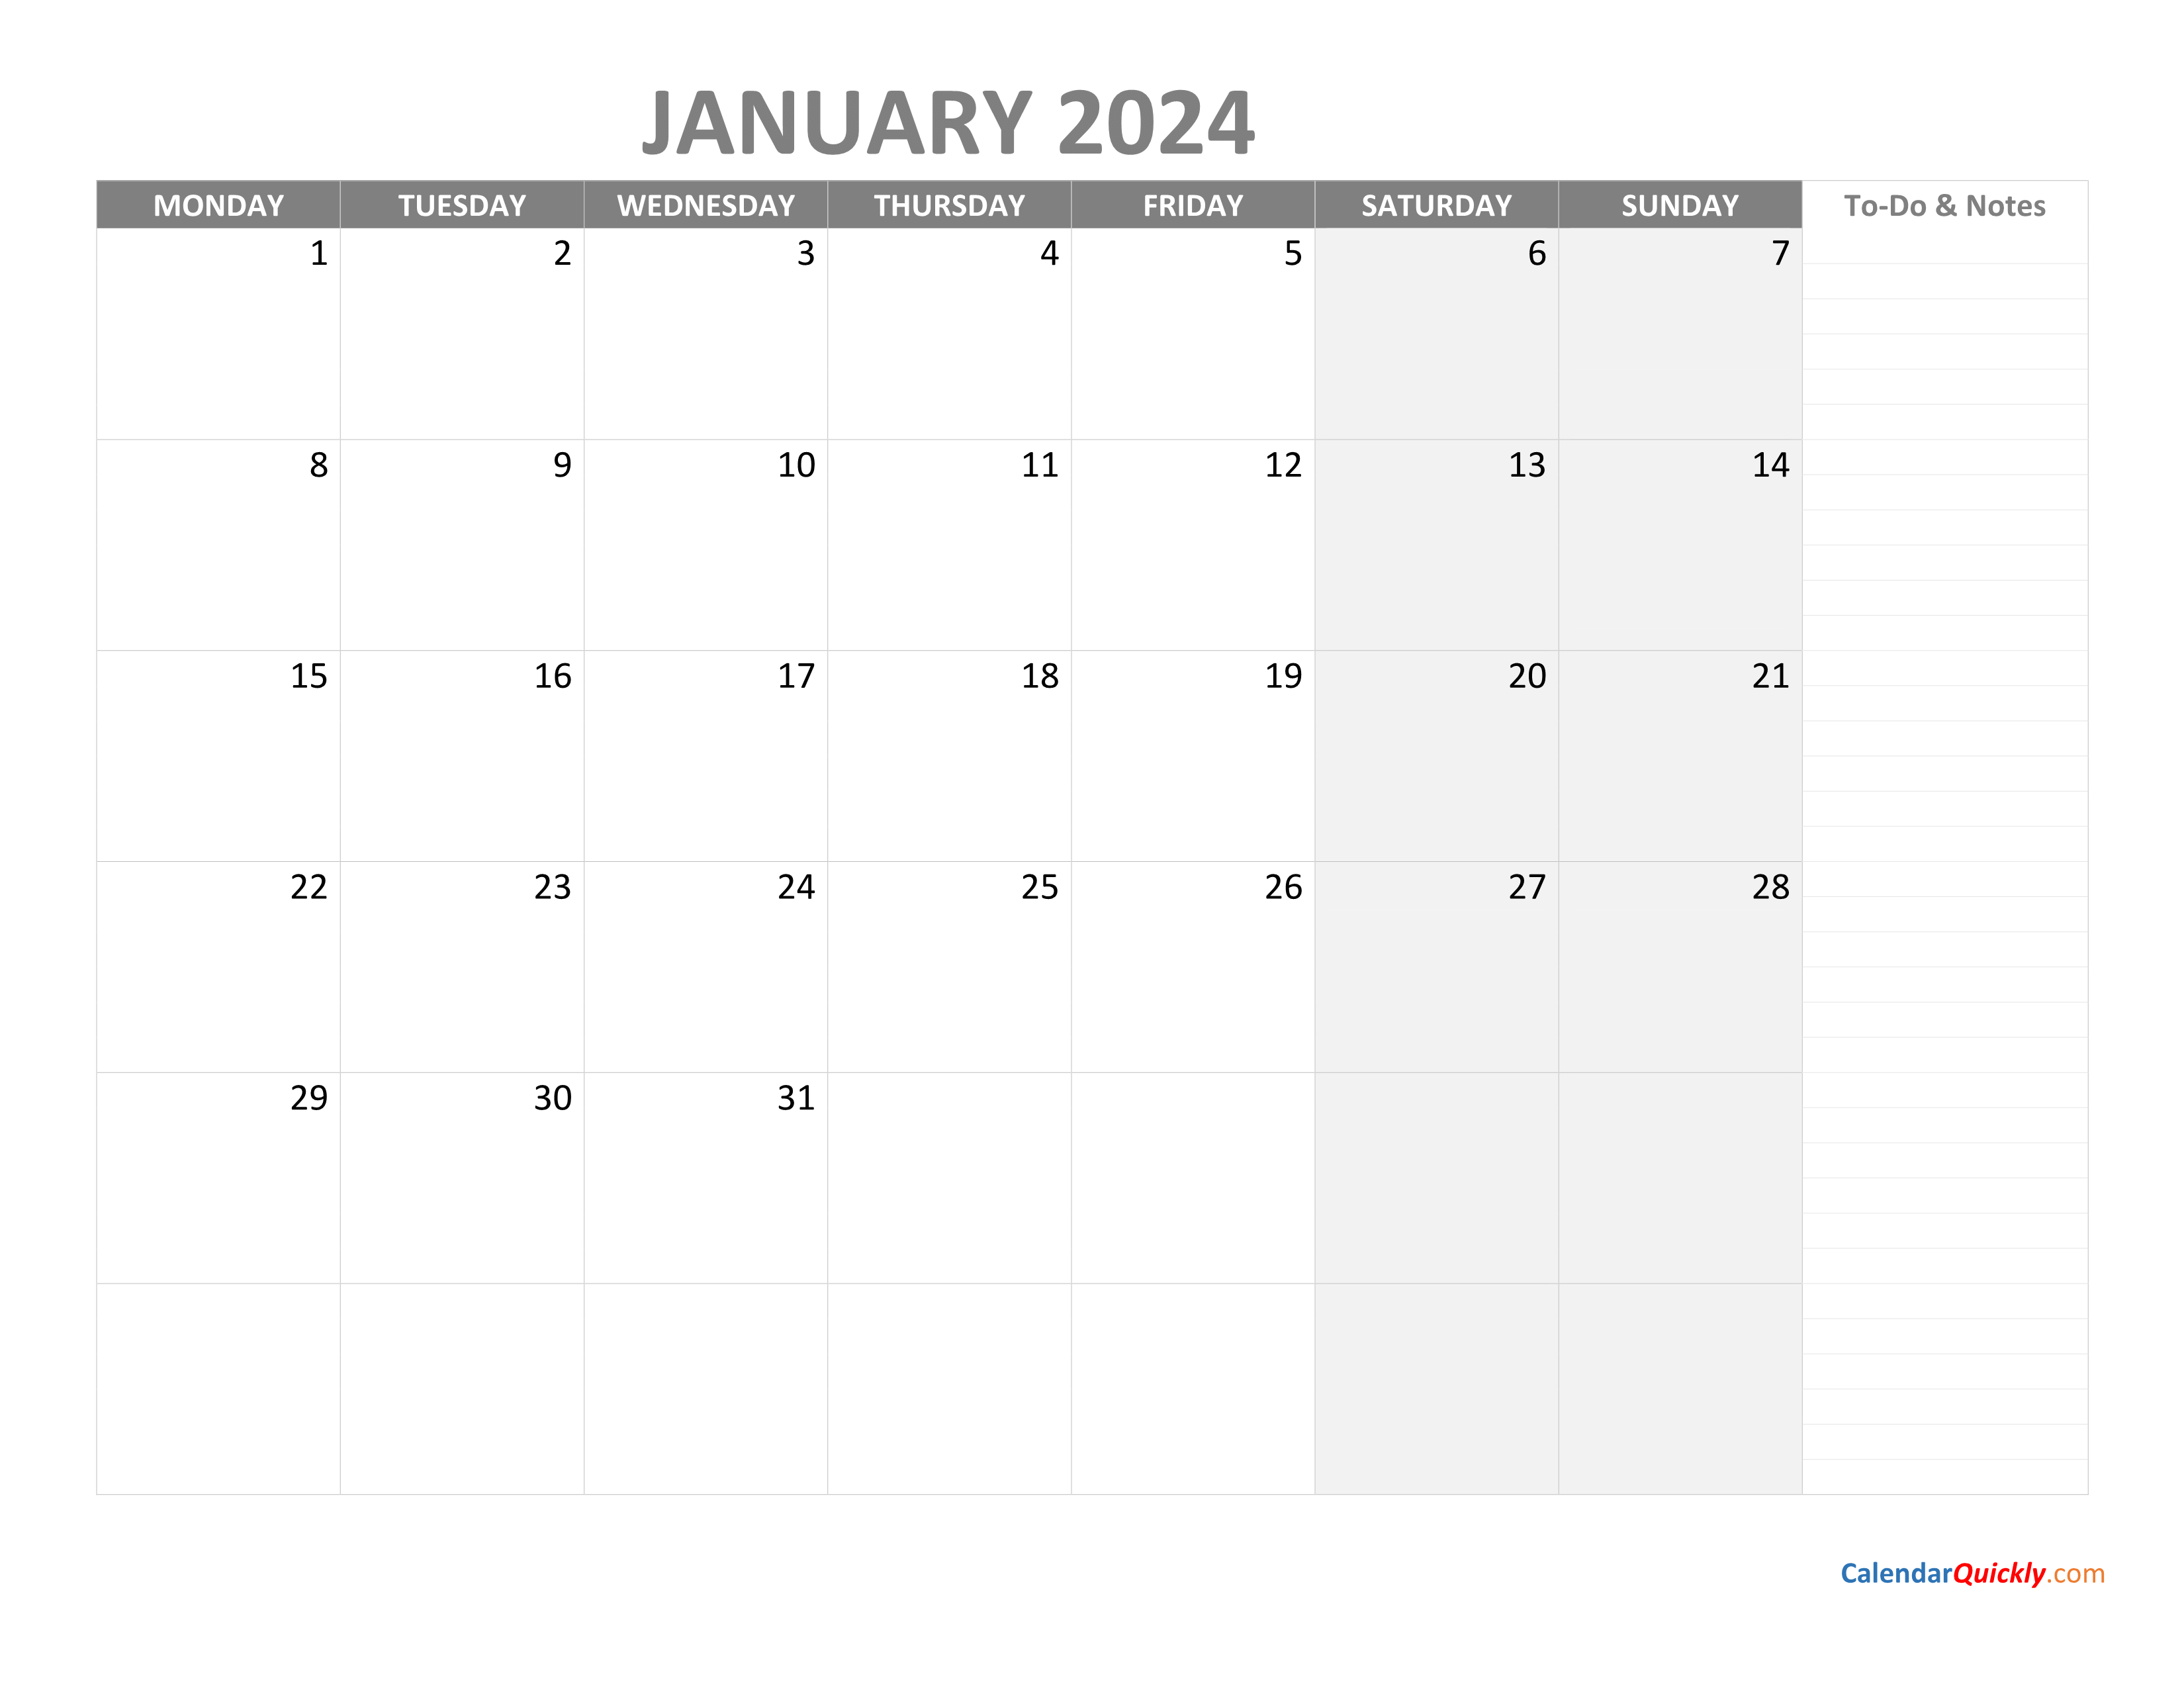 Monthly Monday Calendar 2024 with Notes Calendar Quickly